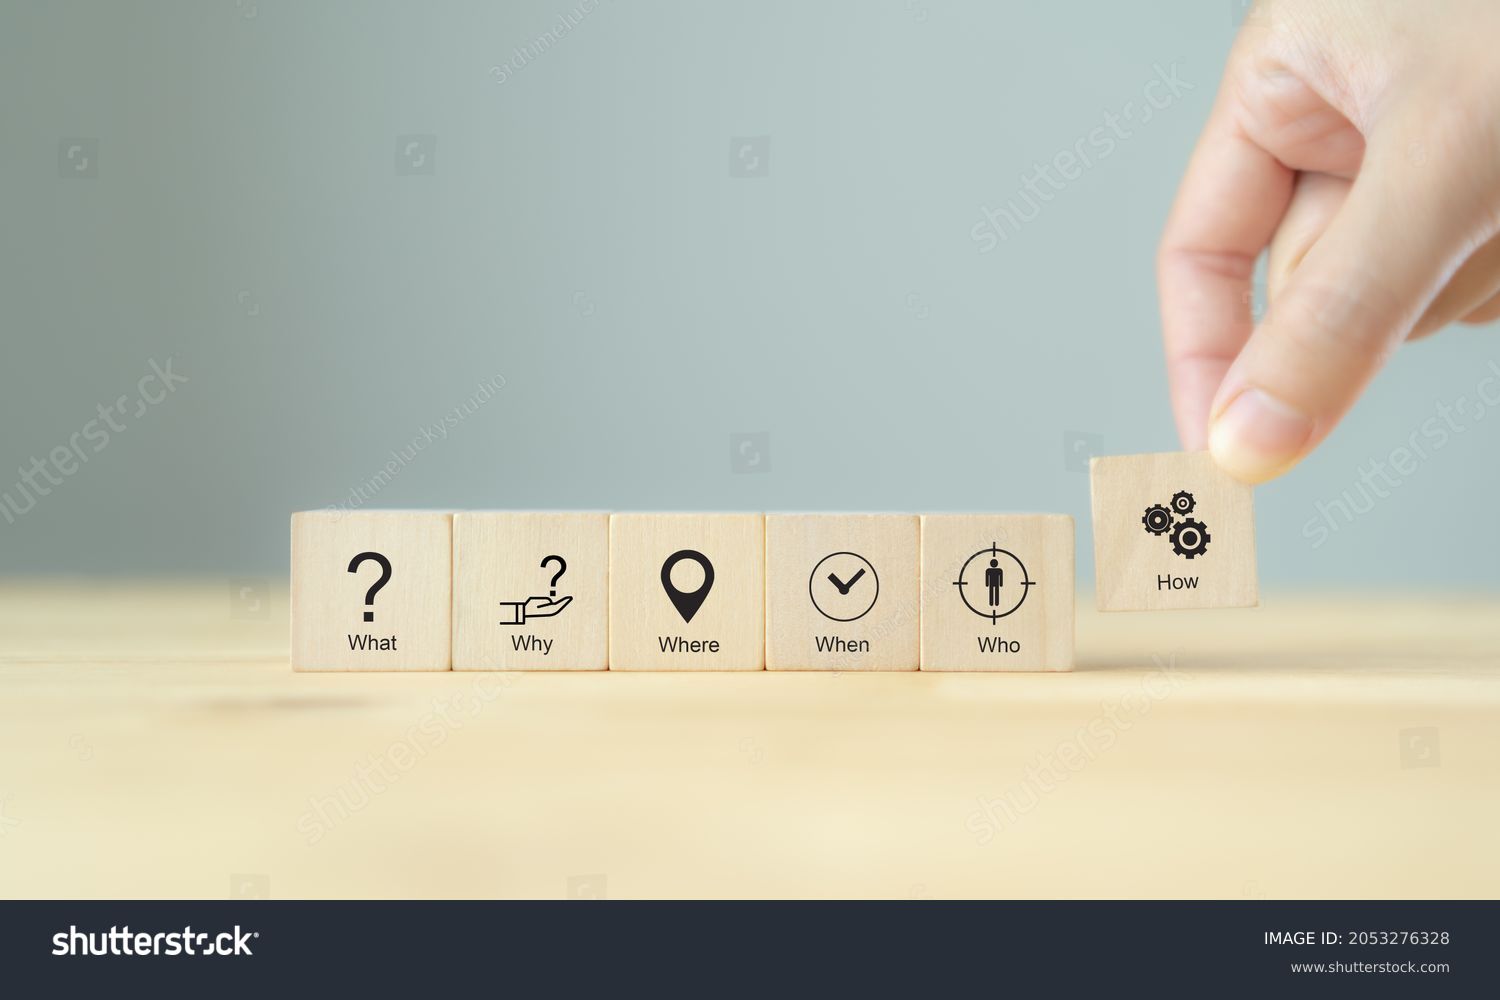 5W1H concept. Business framework and analysis. WHO WHAT WHERE WHEN WHY HOW Questions. The wooden cubes with 5W1H symbols and hand holds "how" cubes block. Beautiful grey background  and copy space. #2053276328